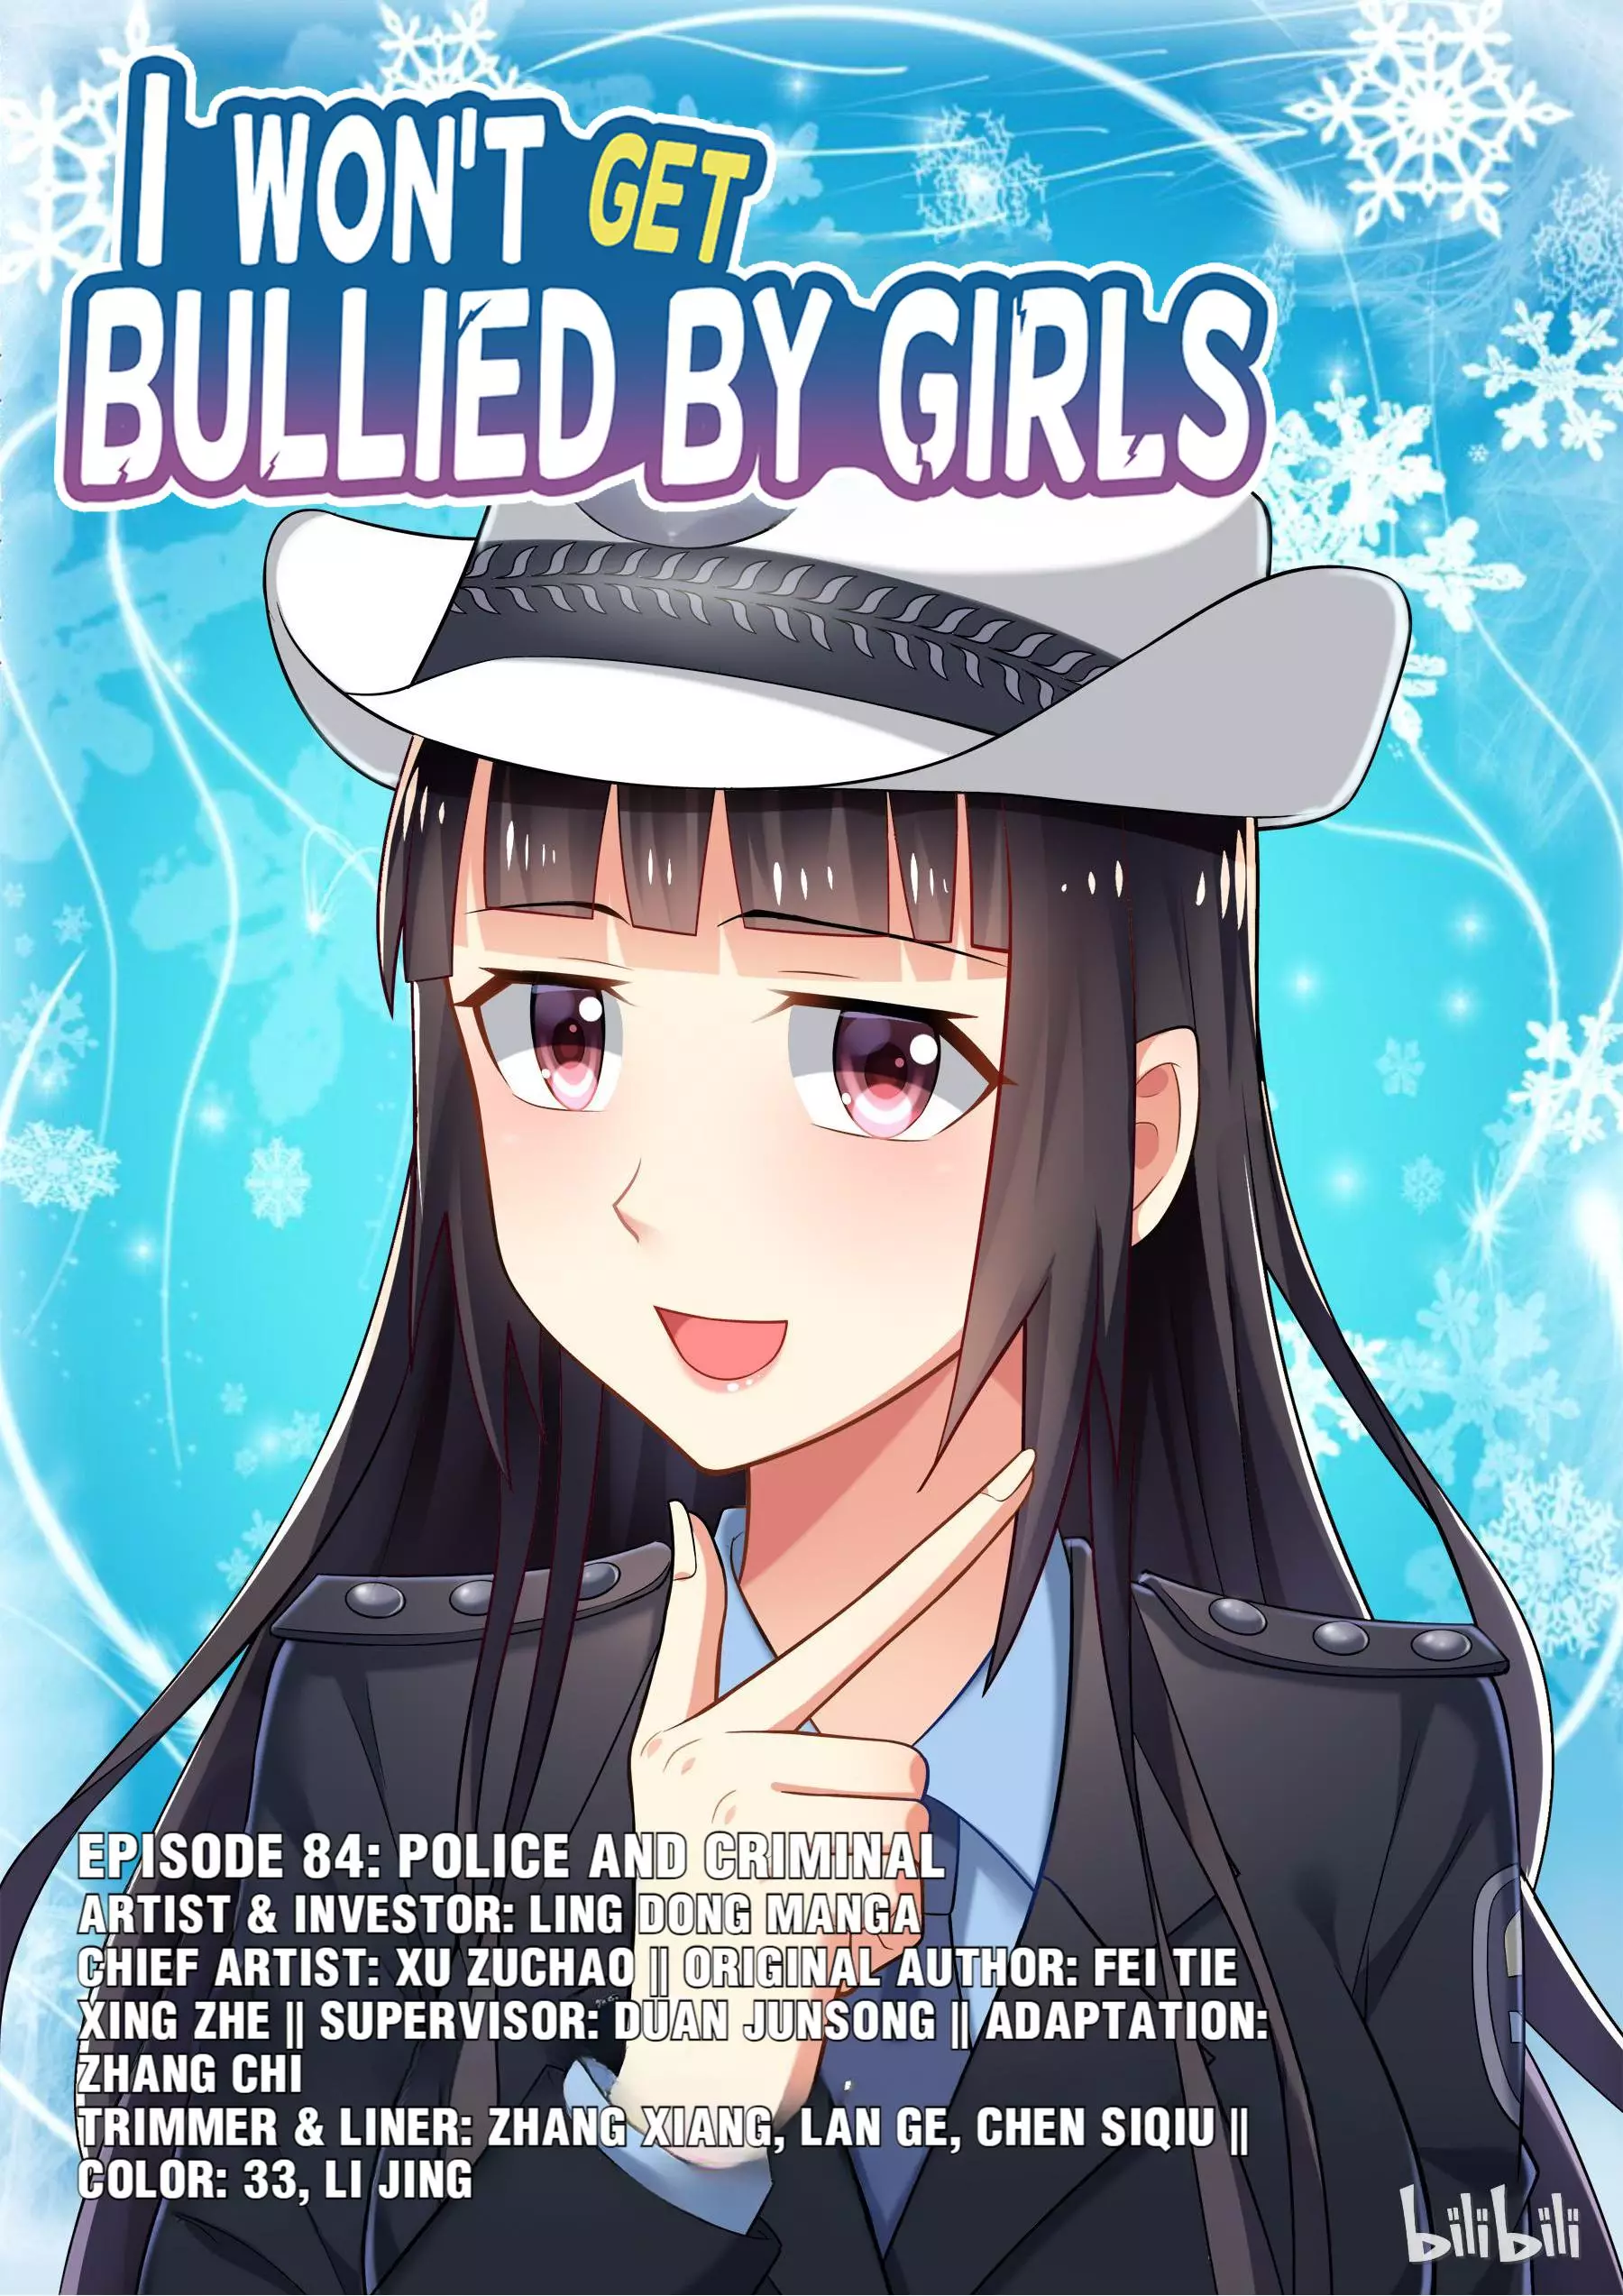 I Don't Want To Be Bullied By Girls - 84 page 1-91cbc62c